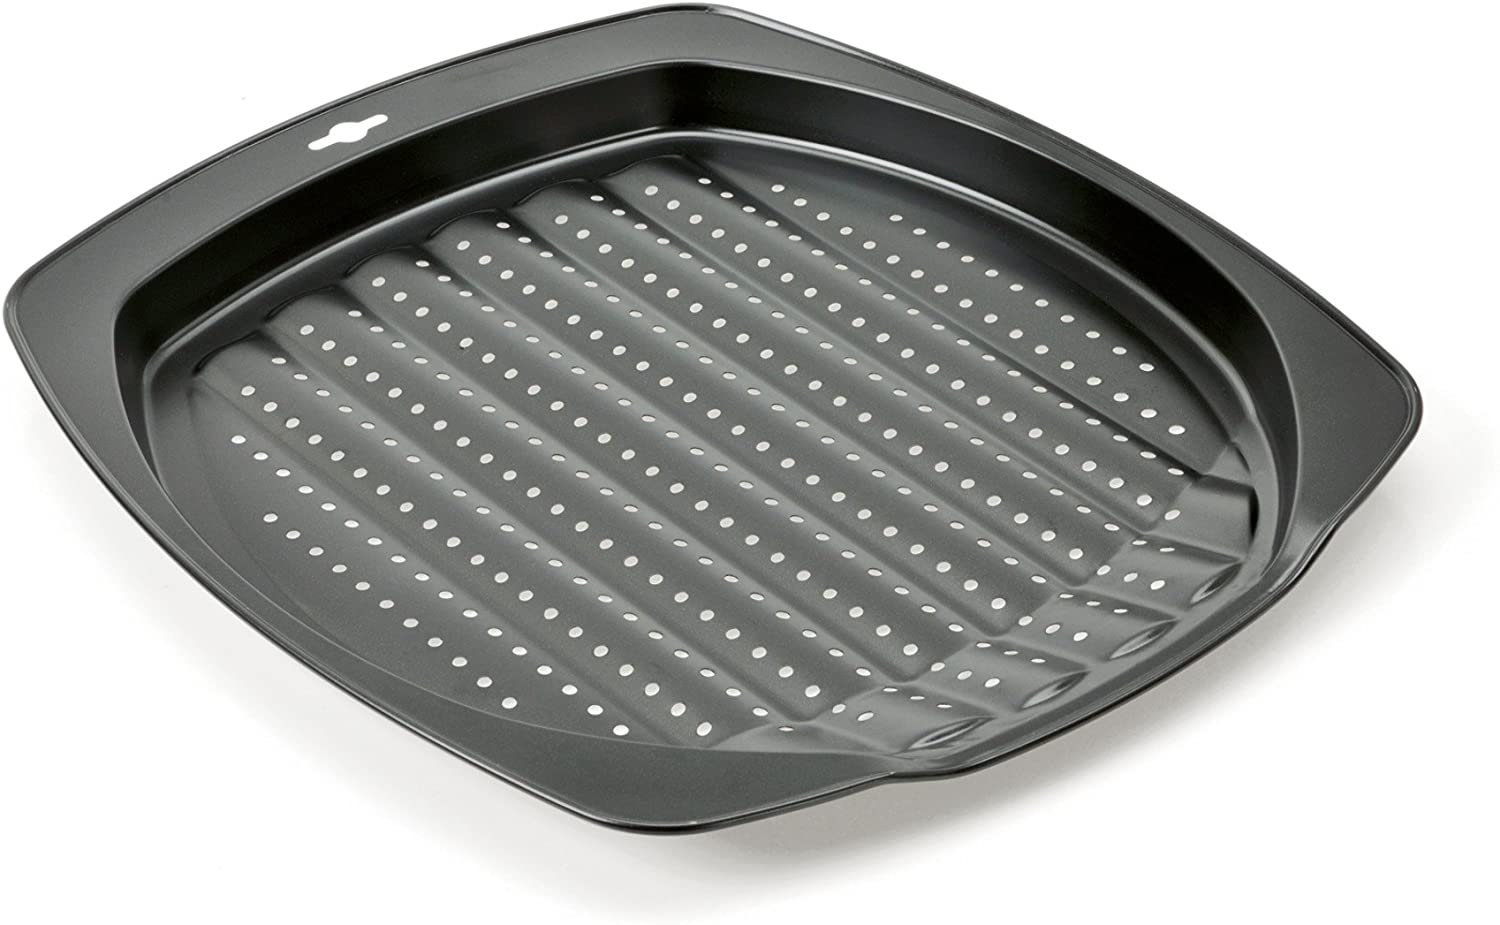 Kaiser Delicious Crossini Chip Pan 39 x 34 x 3 cm, Round Sheet, Pizza Tray, Non-Stick Coating, Wavy Thermal Base